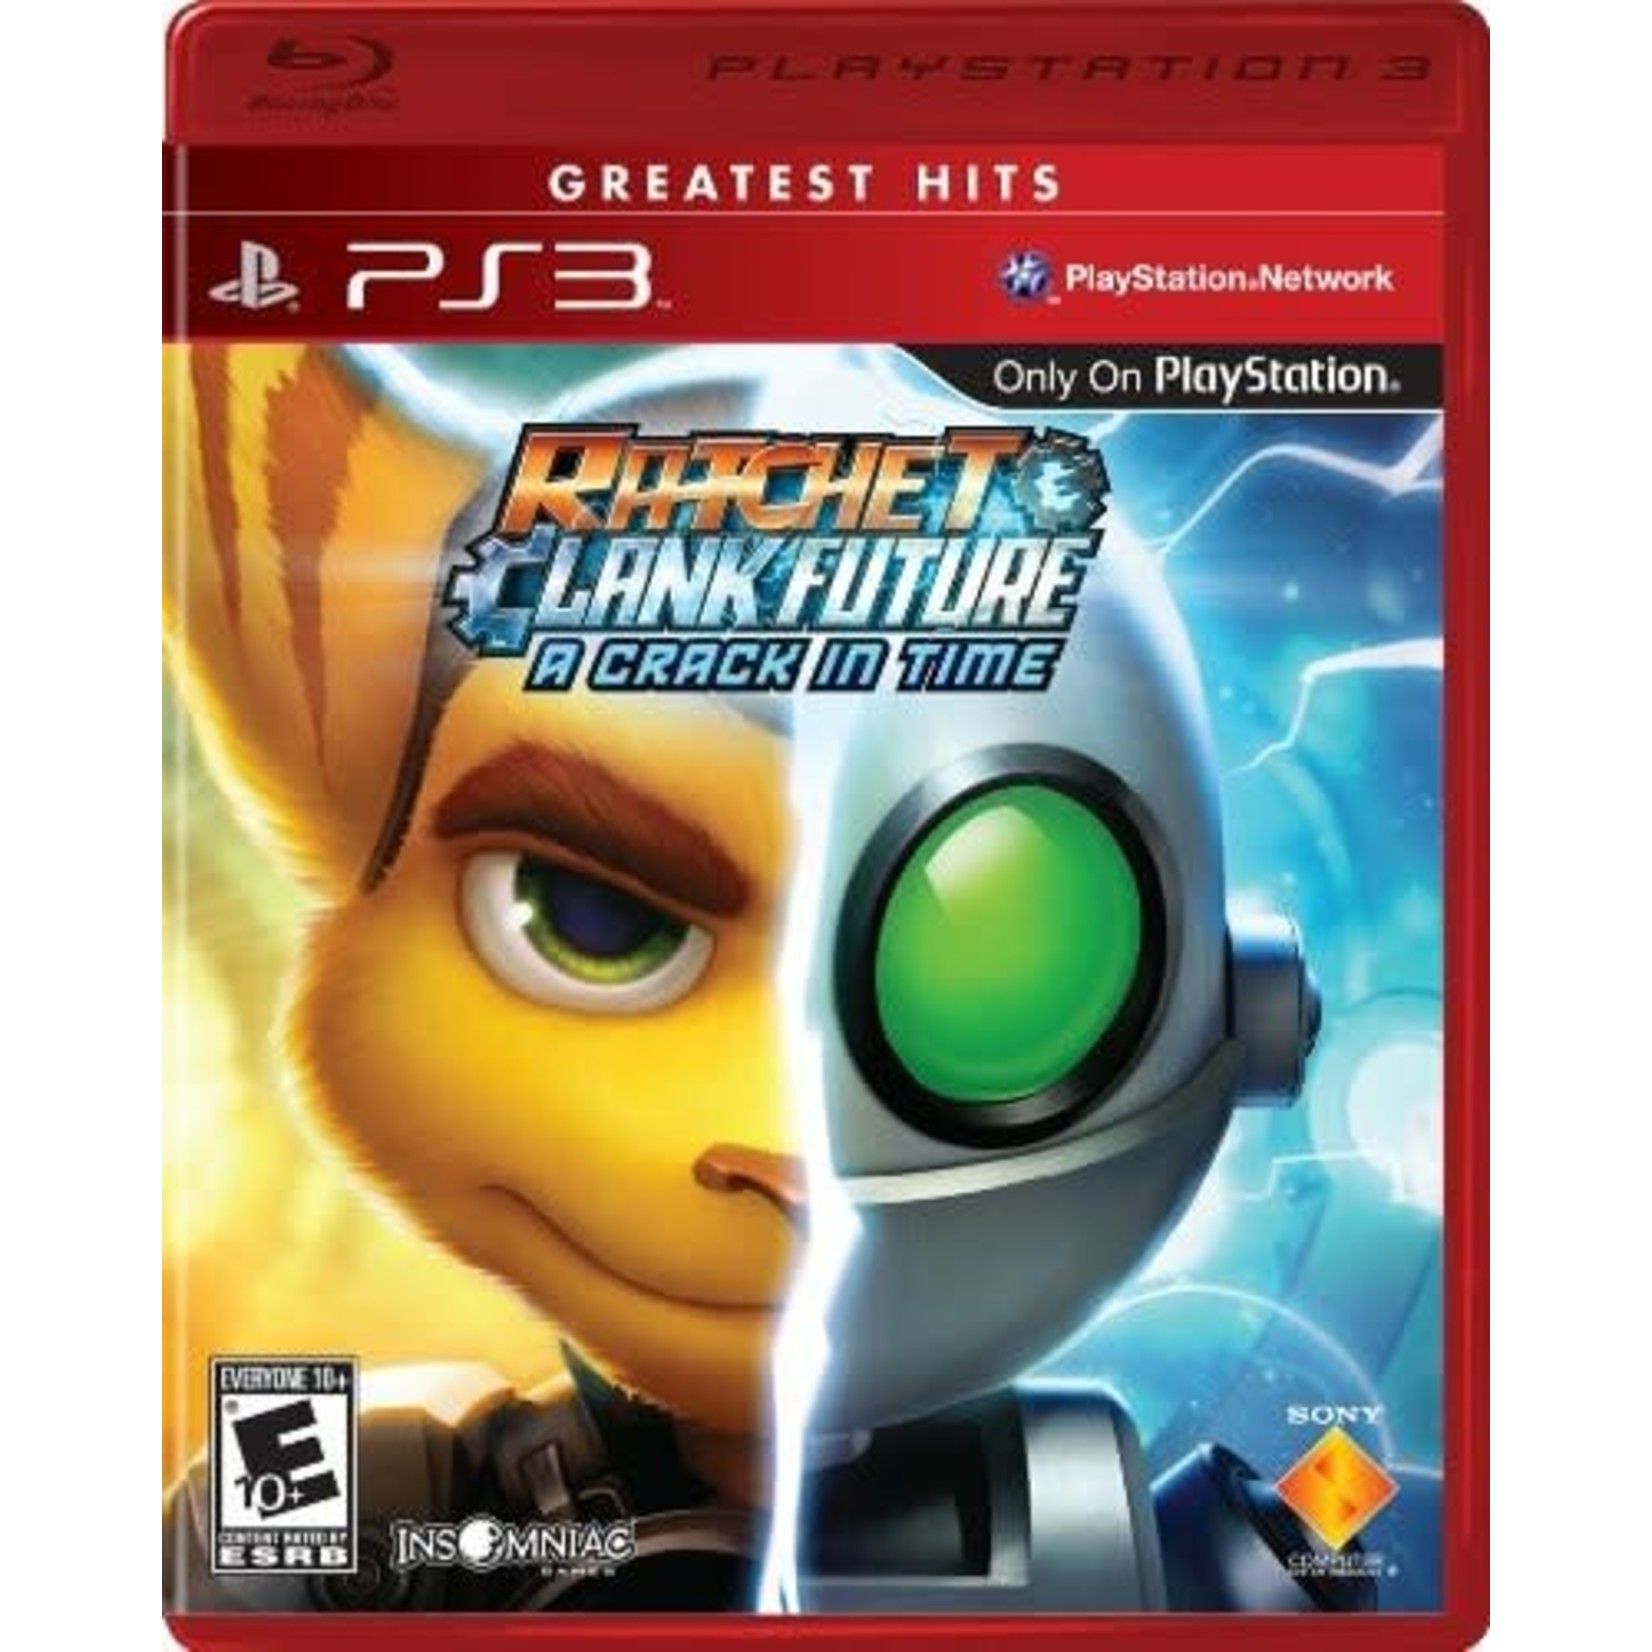 PS3U-RATCHET & CLANK: A CRACK IN TIME